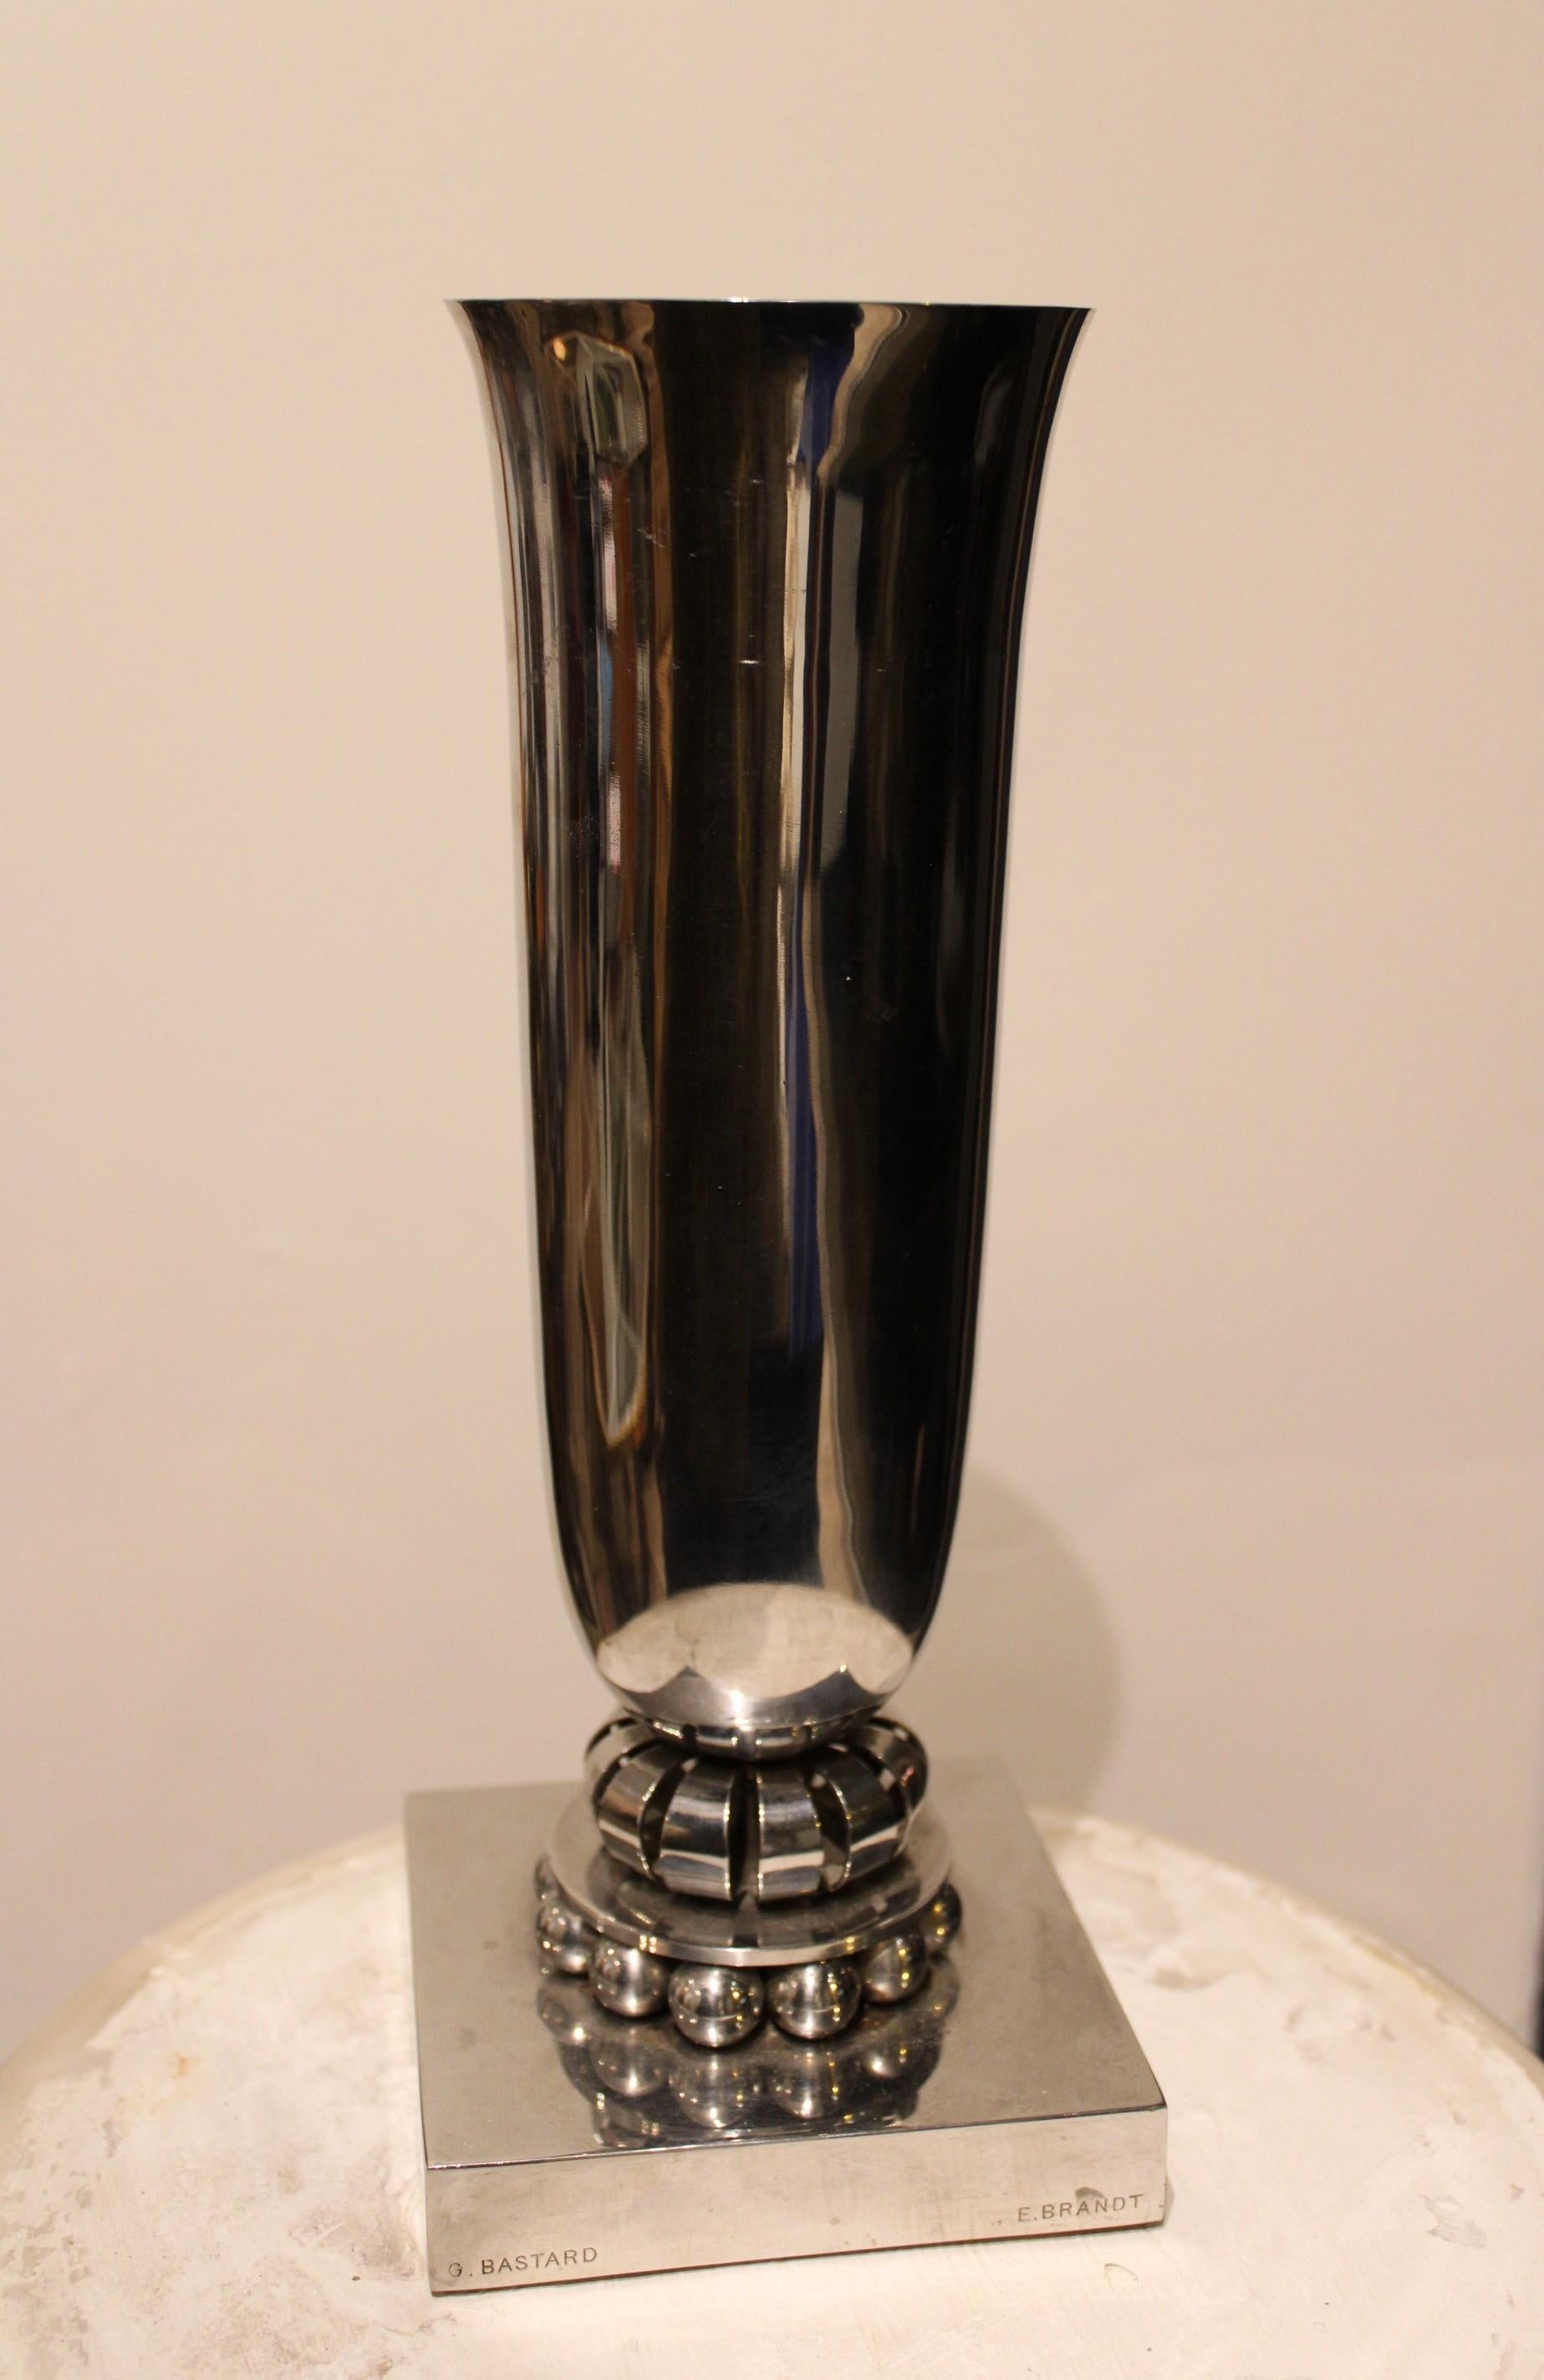 Vase by Edgar Brandt (1880-1960) and George Bastard (1881-1939)
Chromed-metal
Stamped E. Brandt and G. Bastard
Circa 1935
Executed for the liner Normandie.
 